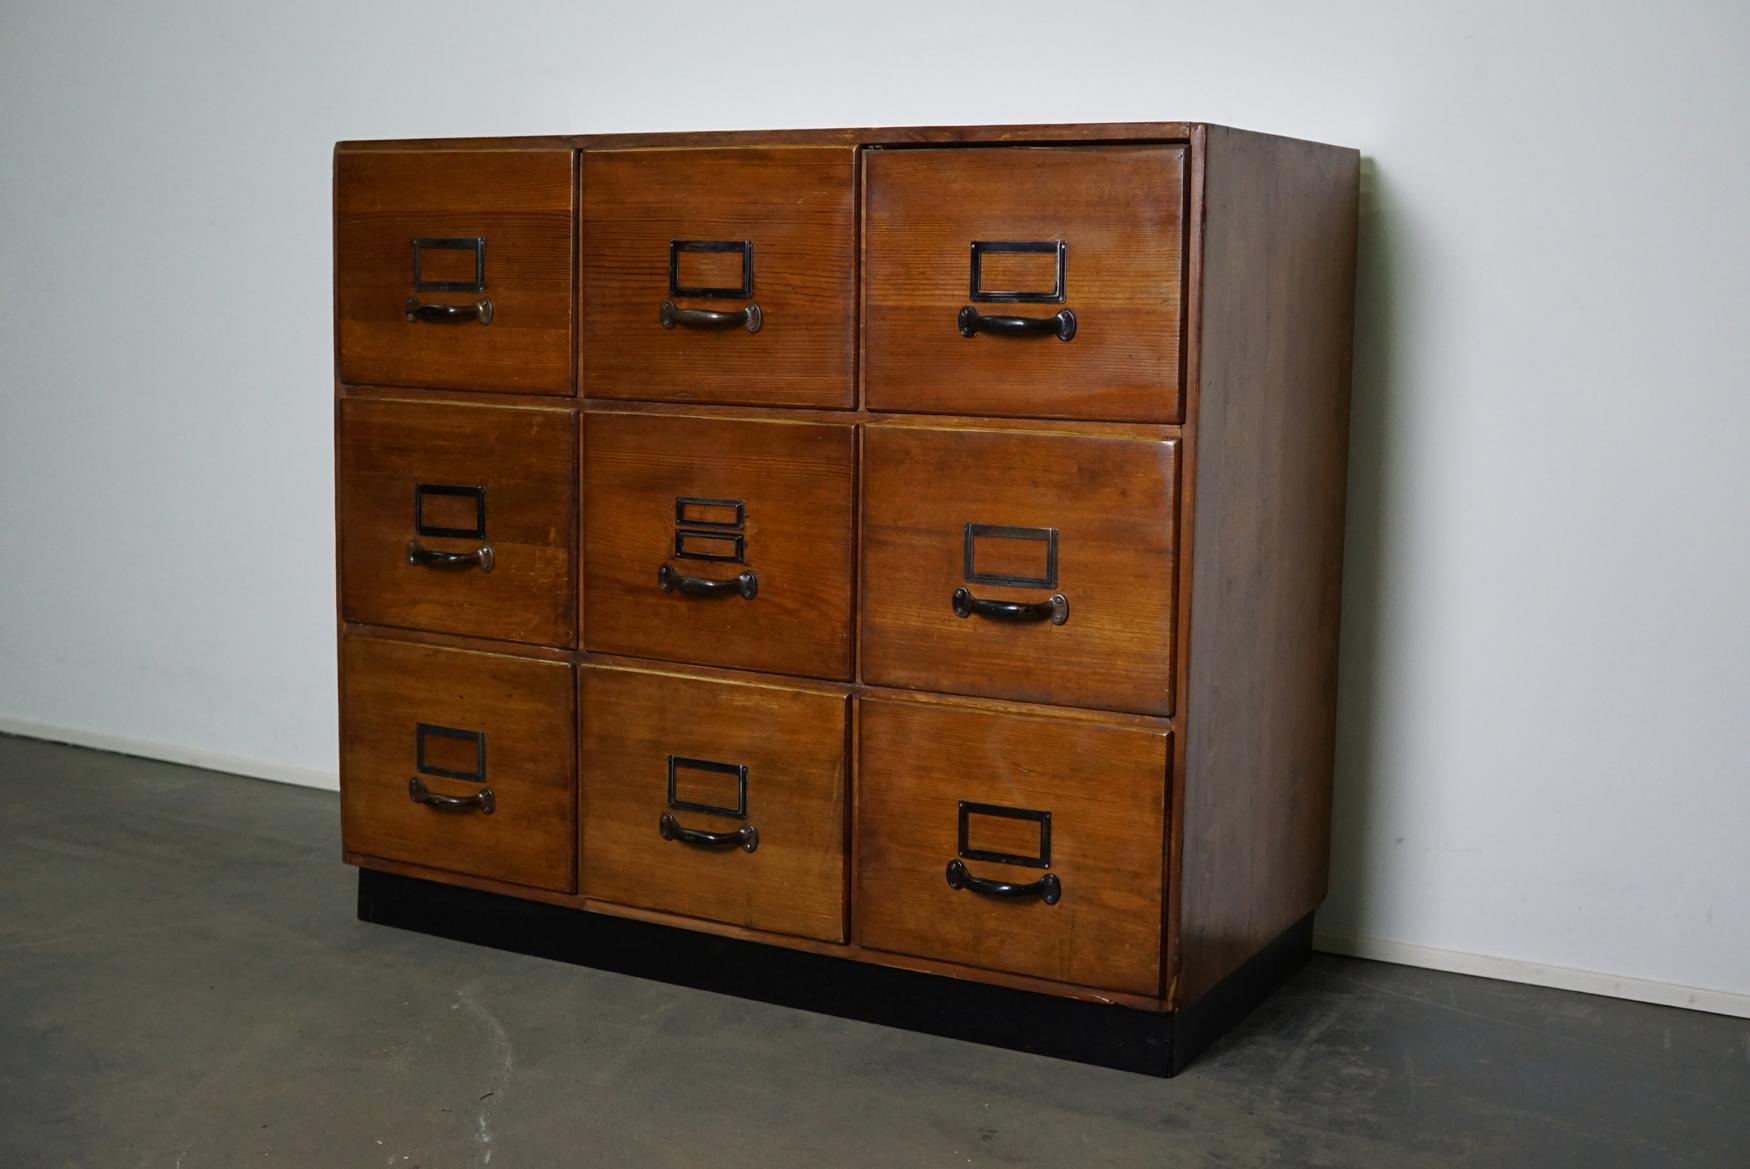 This apothecary cabinet was produced during the 1950s in Germany. This piece features 9 large drawers with nice metal handles and name card holders. The interior dimensions of the drawers are: D x W x H 41 x 28 x 23 cm.